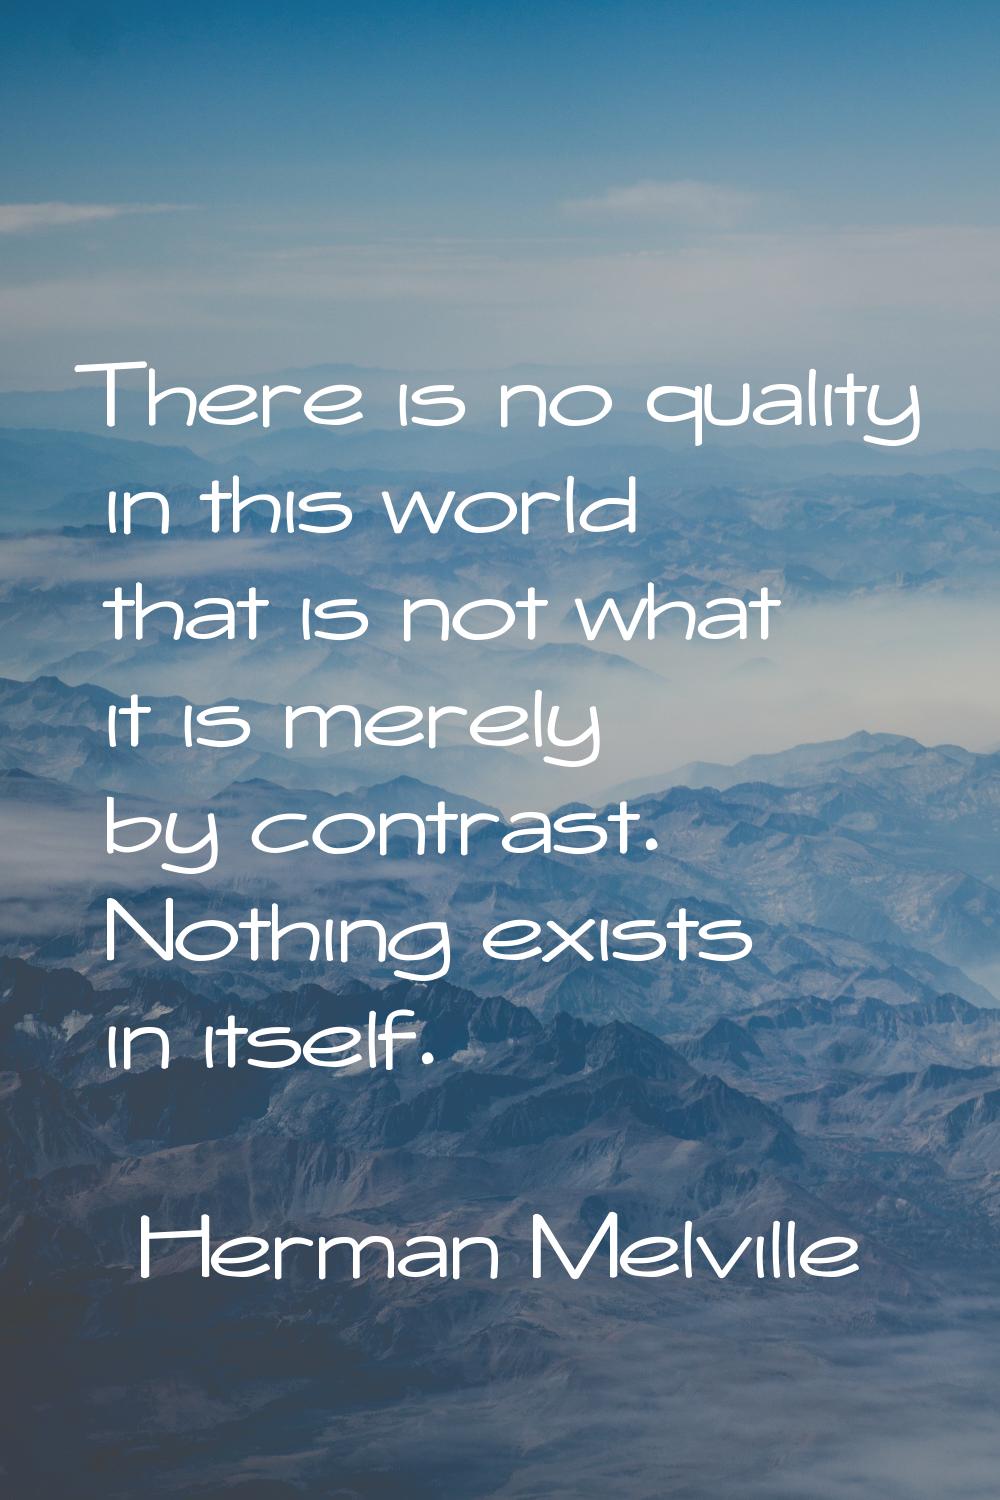 There is no quality in this world that is not what it is merely by contrast. Nothing exists in itse